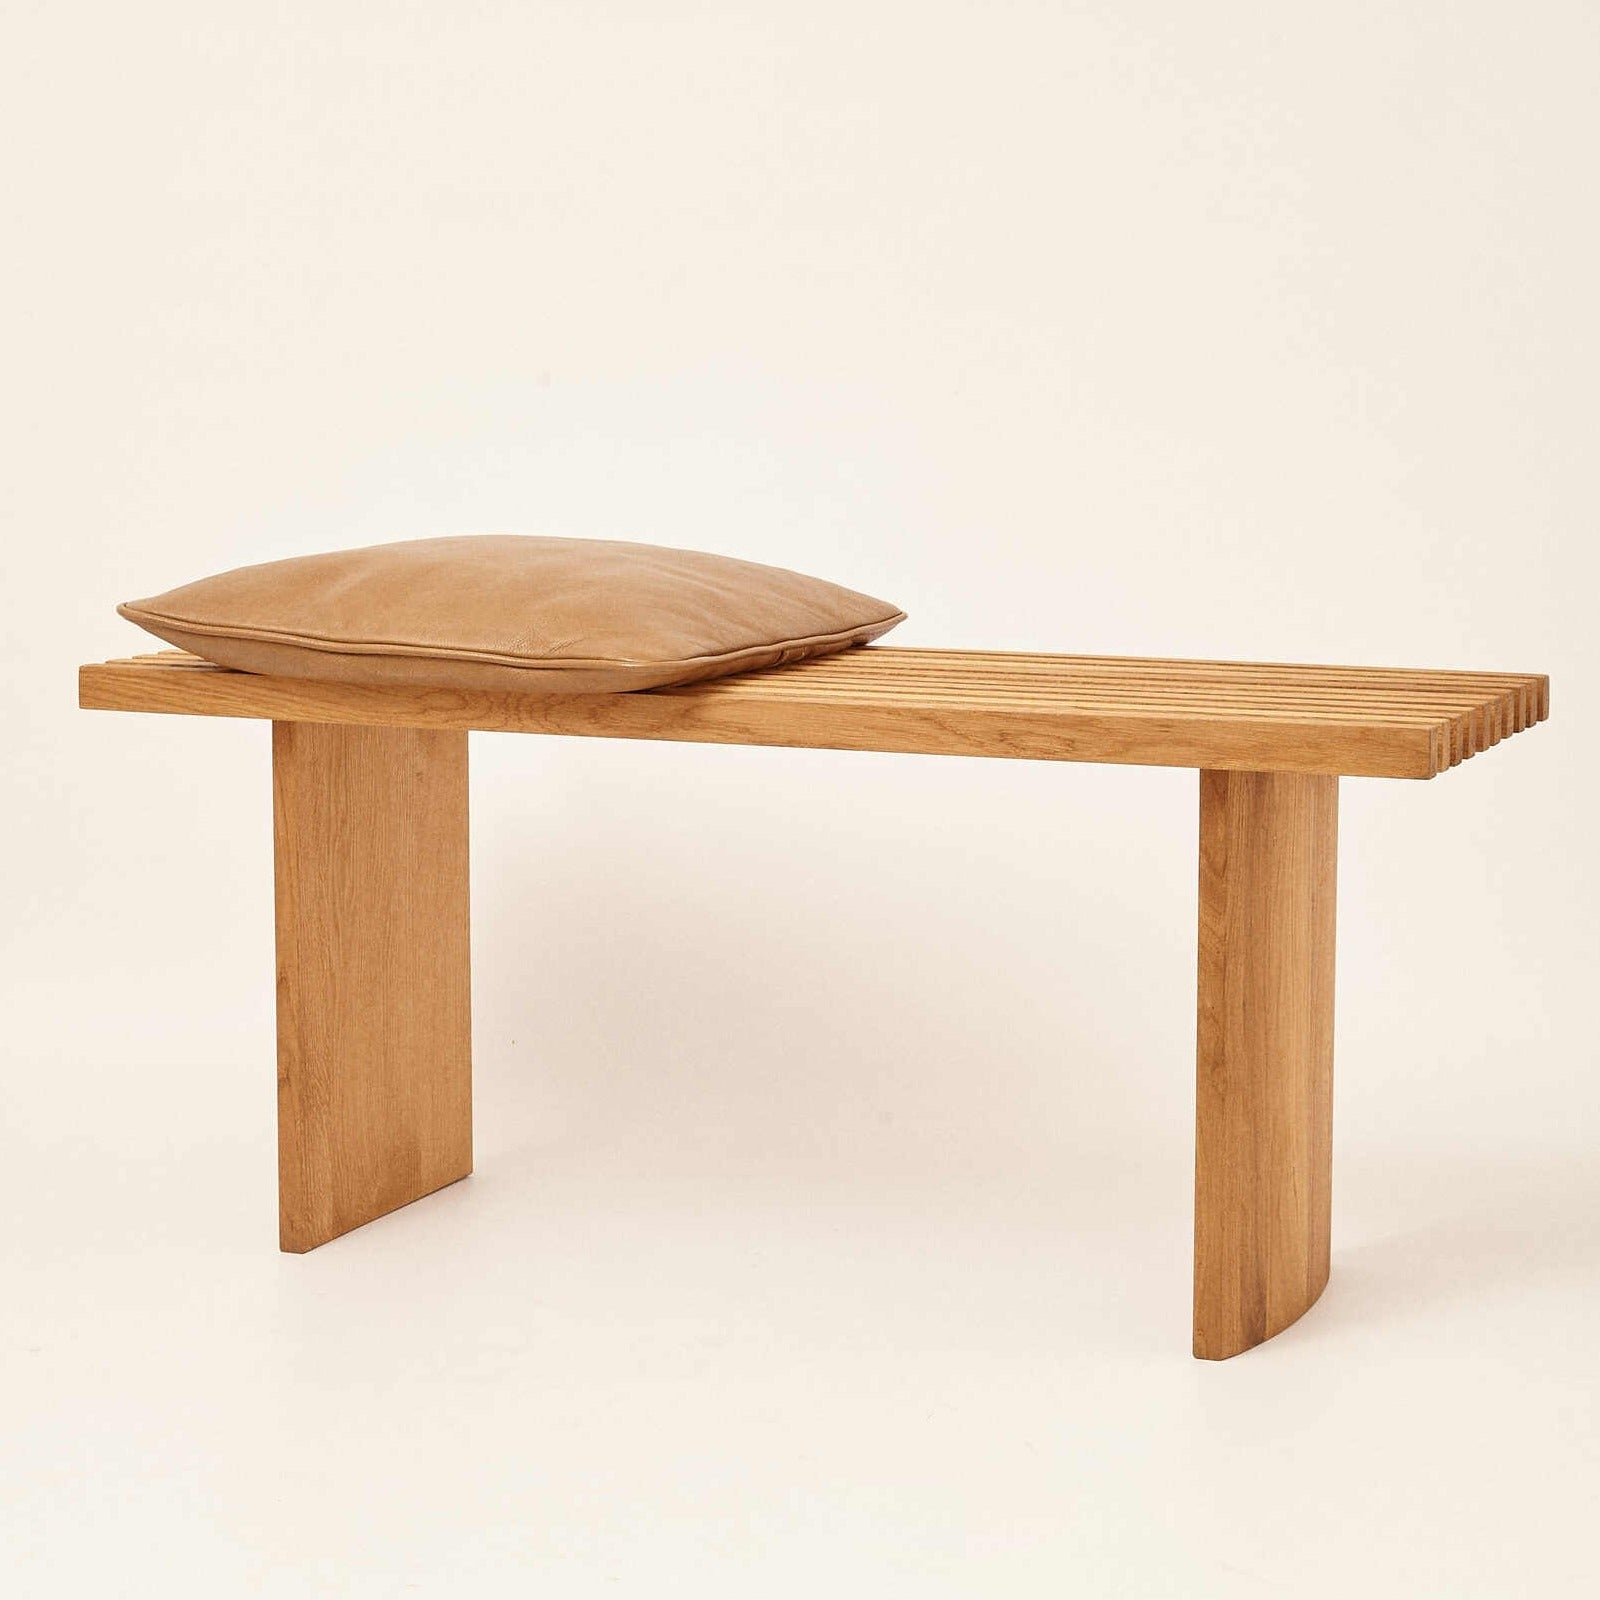 QUBANC Bench 105 natural oak-front view with pillow